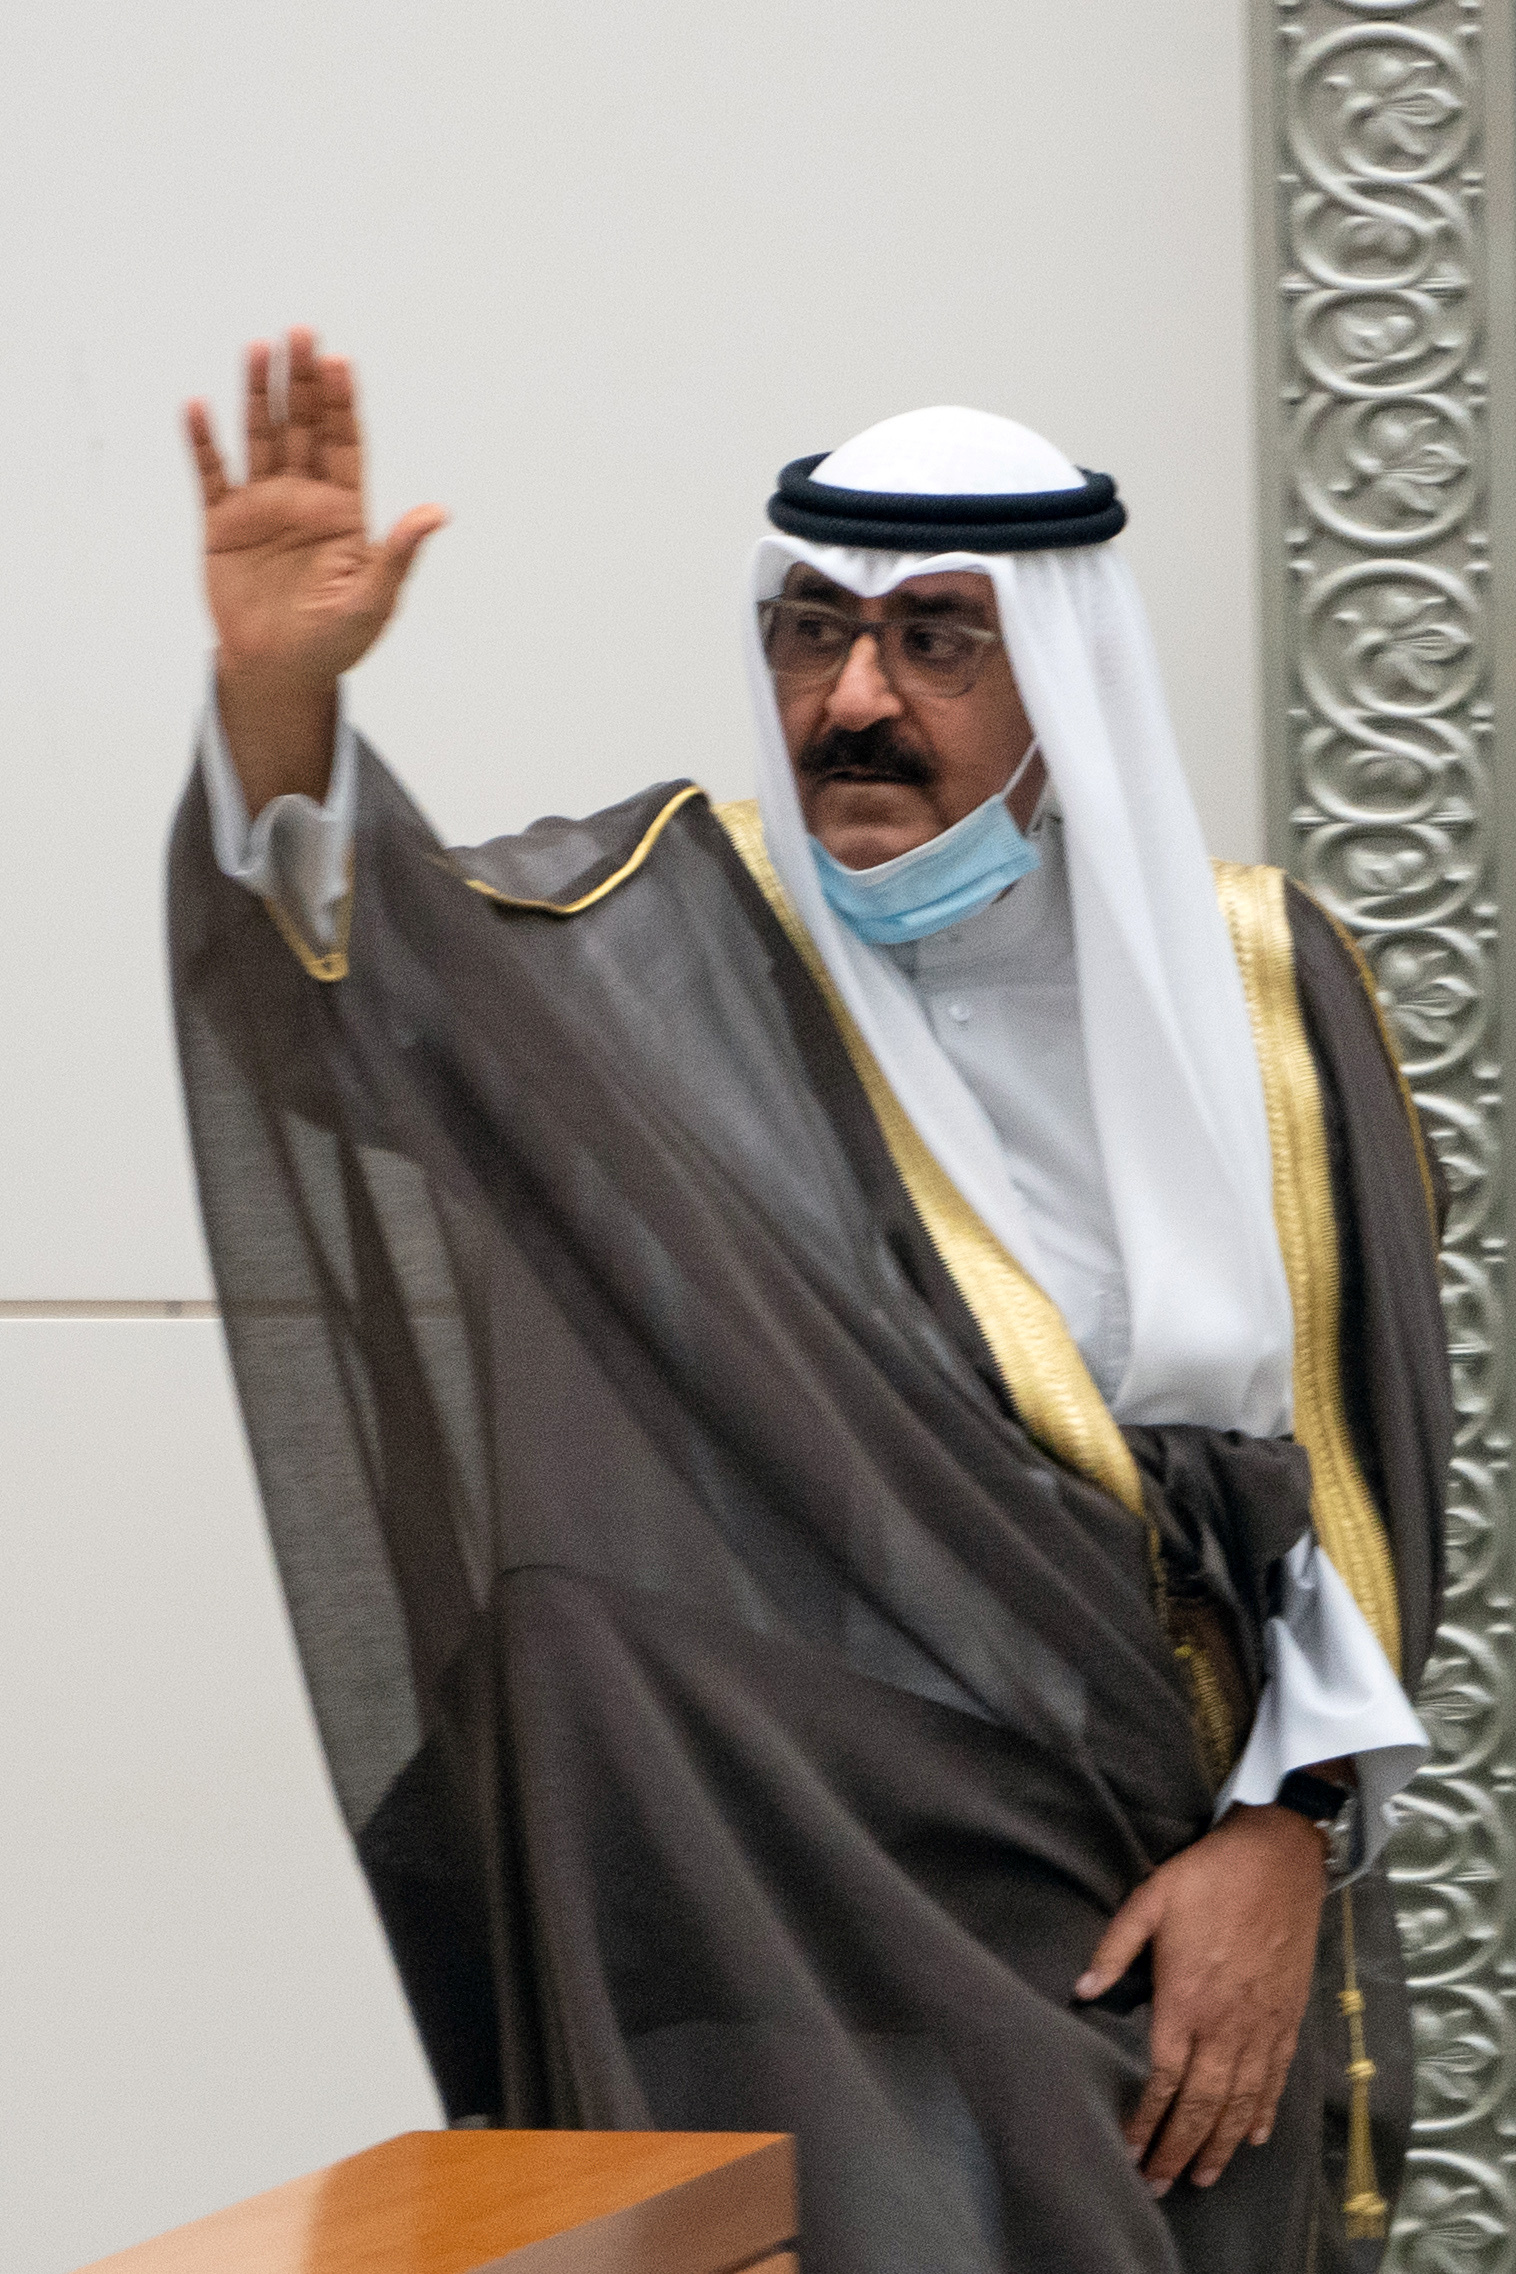 Kuwait's newly appointed crown prince sworn in